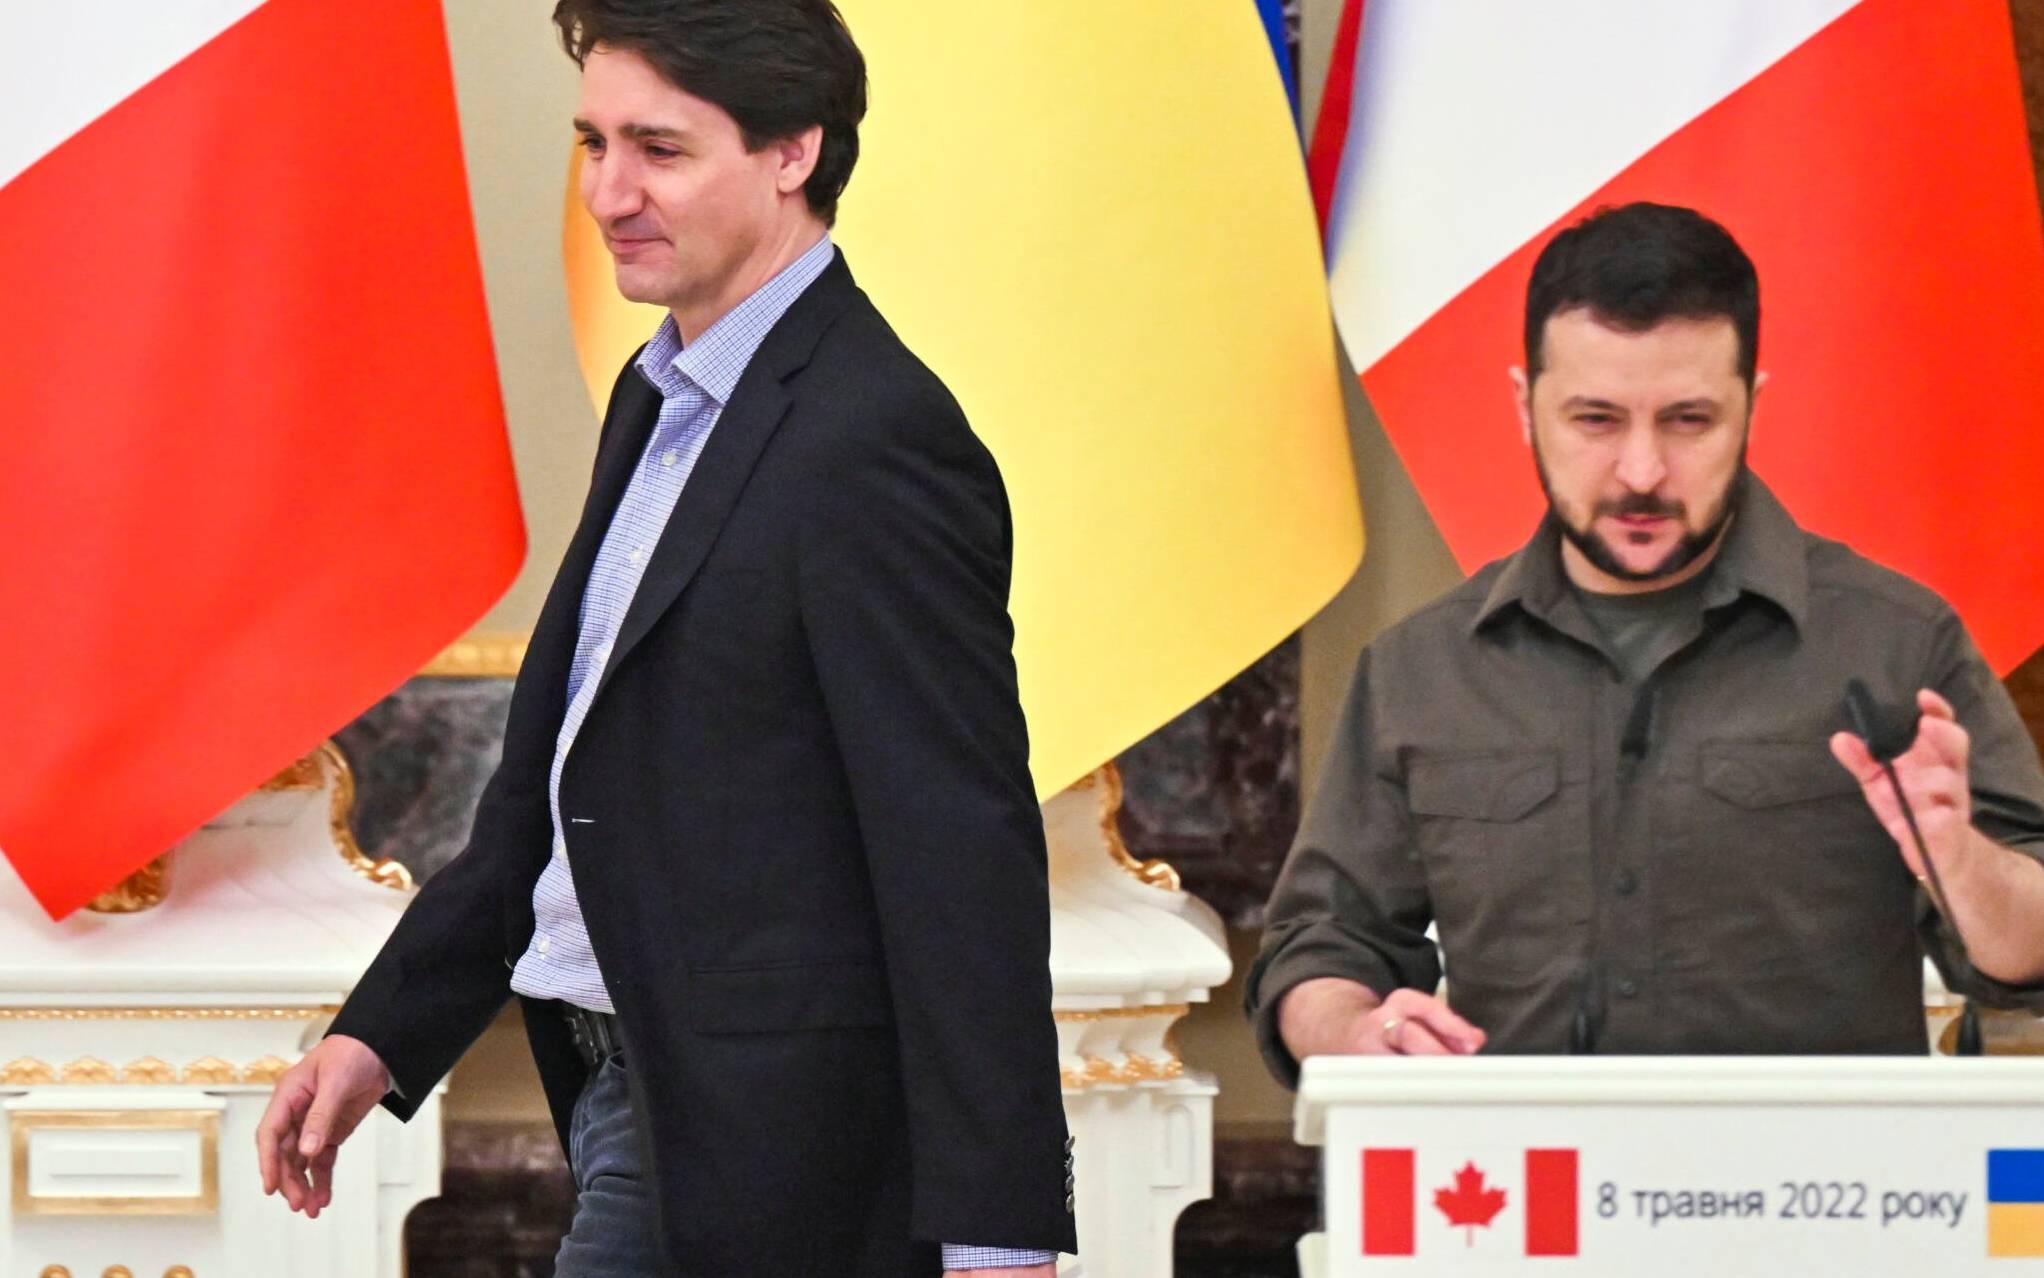 Ukrainian President Volodymyr Zelensky (R) and Canada's Prime Minister Justin Trudeau (L) arrive for a joint press conference in Kyiv on May 8, 2022 amid the Russian invasion of Ukraine. - Canadian Prime Minister Justin Trudeau visited Irpin outside the capital of Ukraine, its mayor said, where Russian forces were accused of atrocities against civilians, before meeting with President Zelensky and reaffirm Canada's unwavering support for the Ukrainian people." (Photo by Sergei SUPINSKY / AFP)